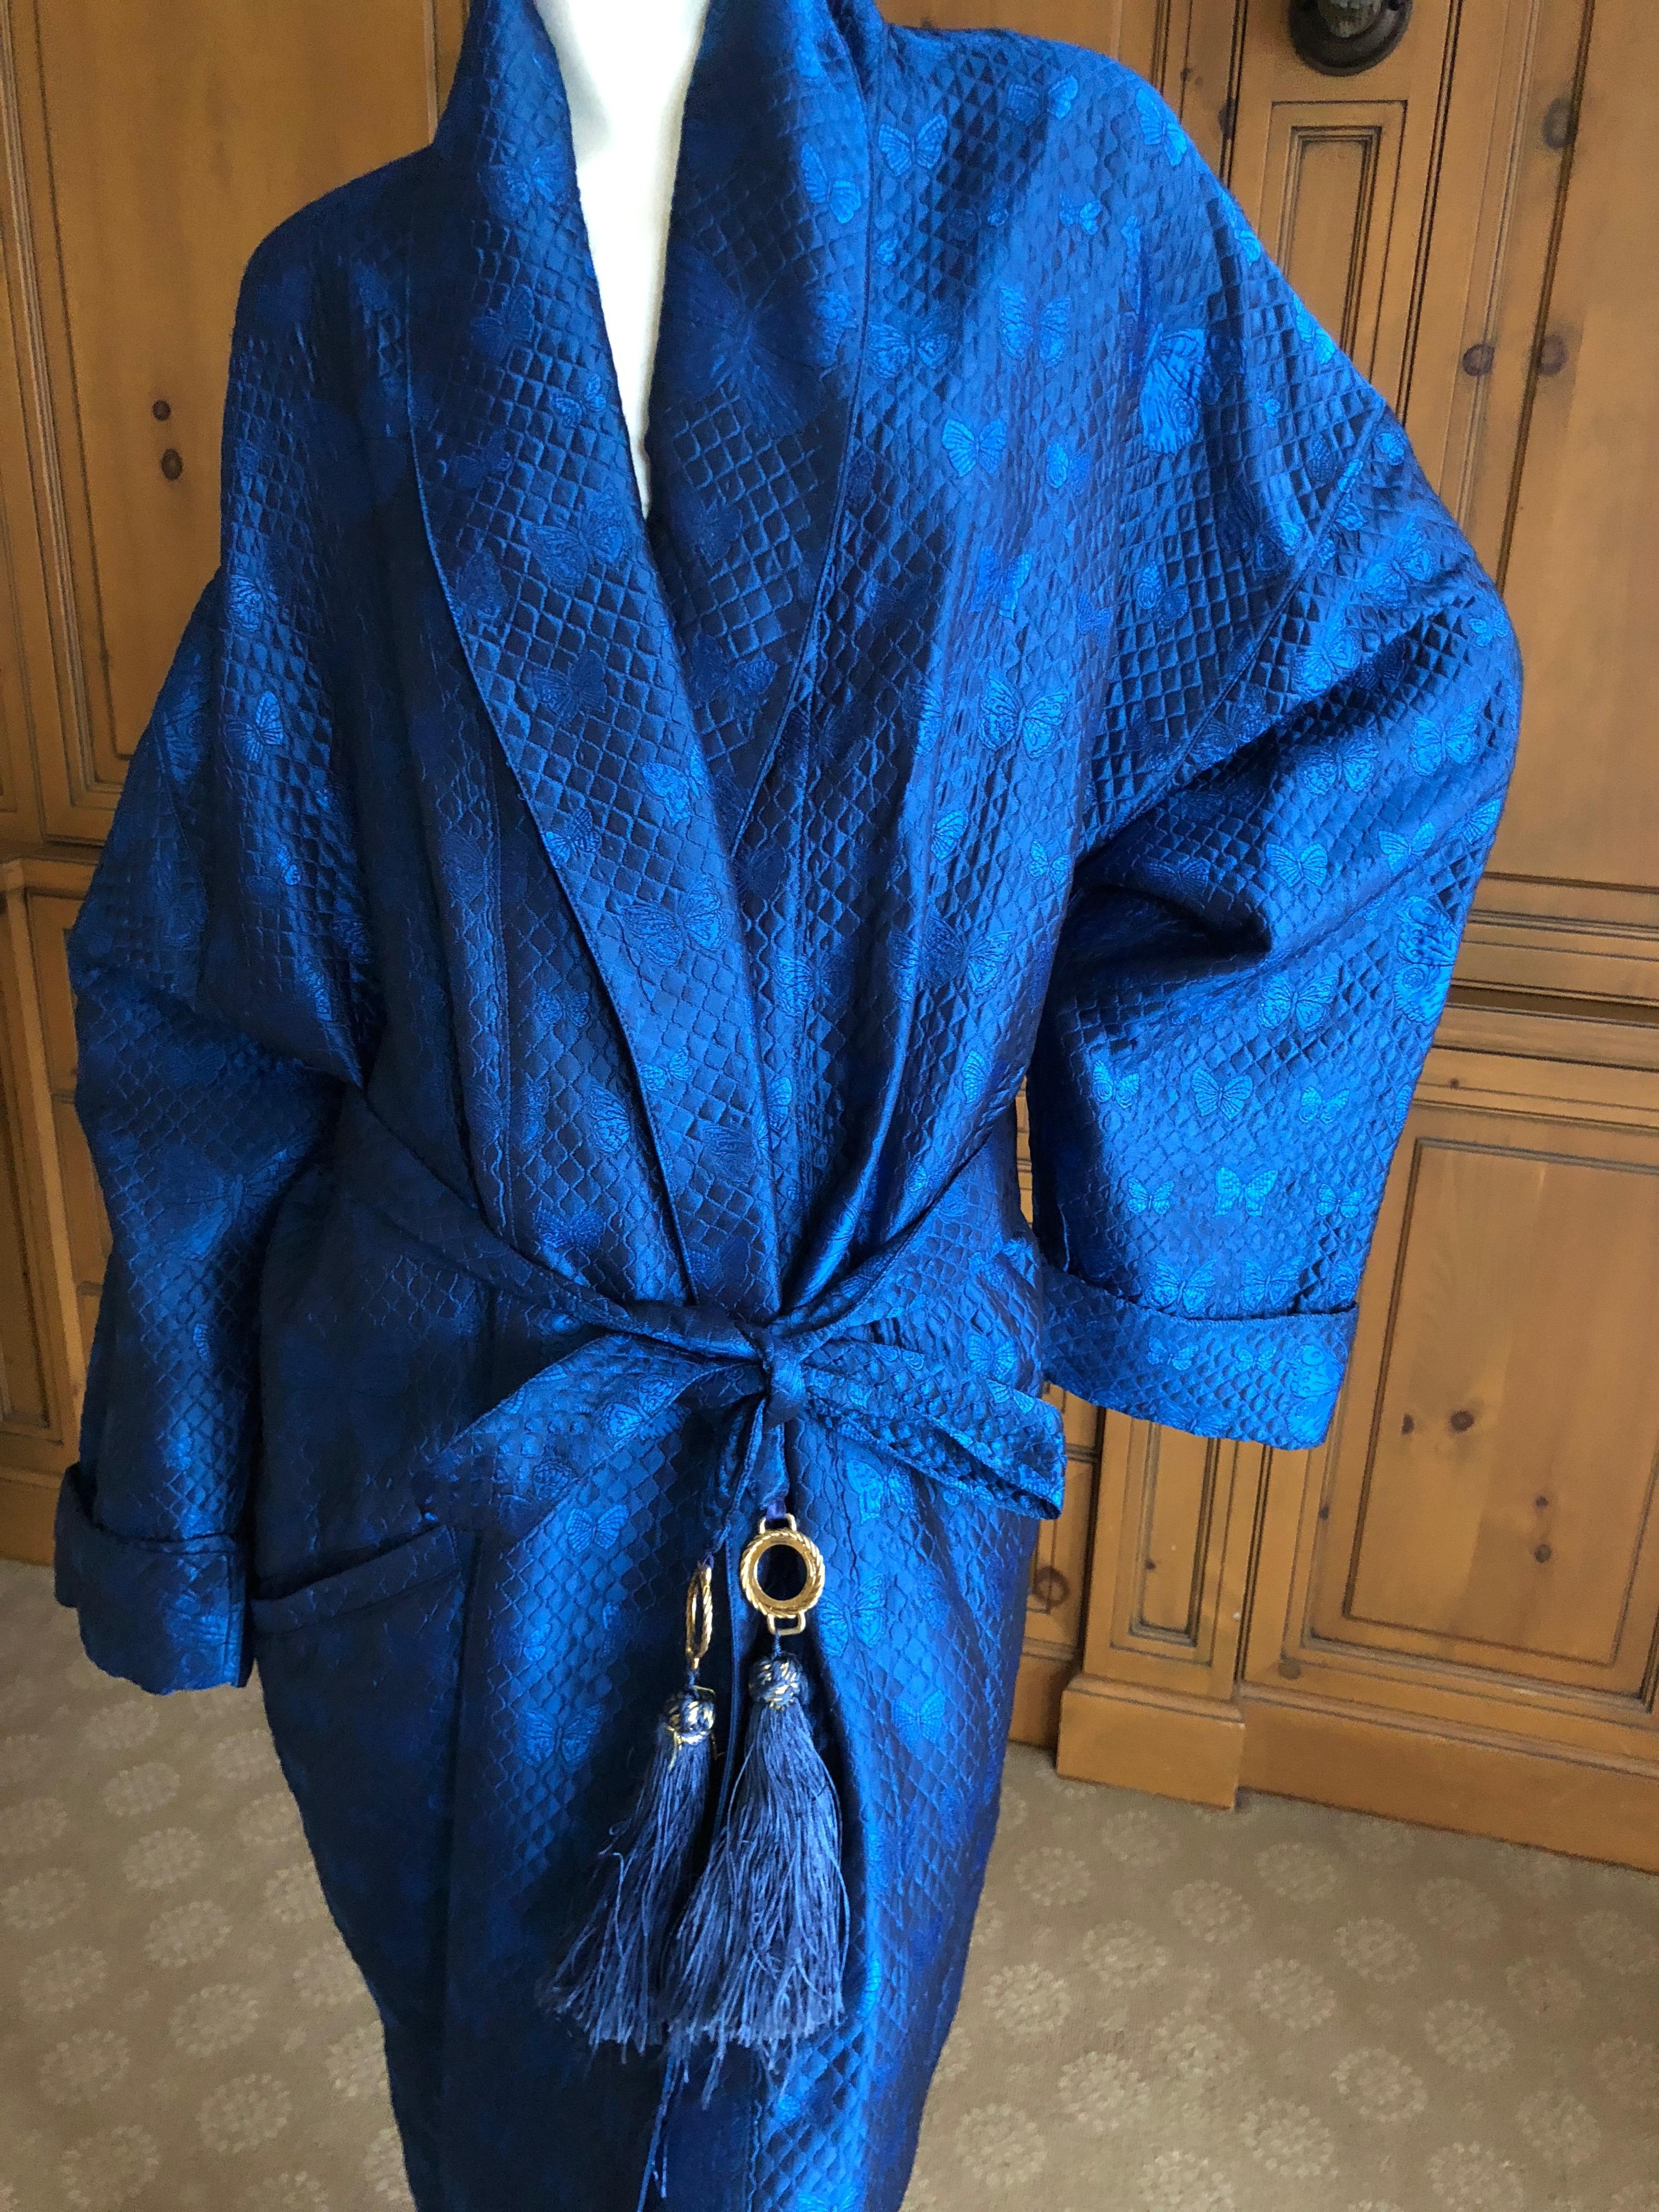  Gianni Versace Intimo 1980's Royal Blue Silk Butterfly Pattern Brocade Robe with Fringe Belt.
I believe this is from the men's collection, but could work for men or woman.

There is no size label, I would say it's a XX large
Measurements ;

 Chest